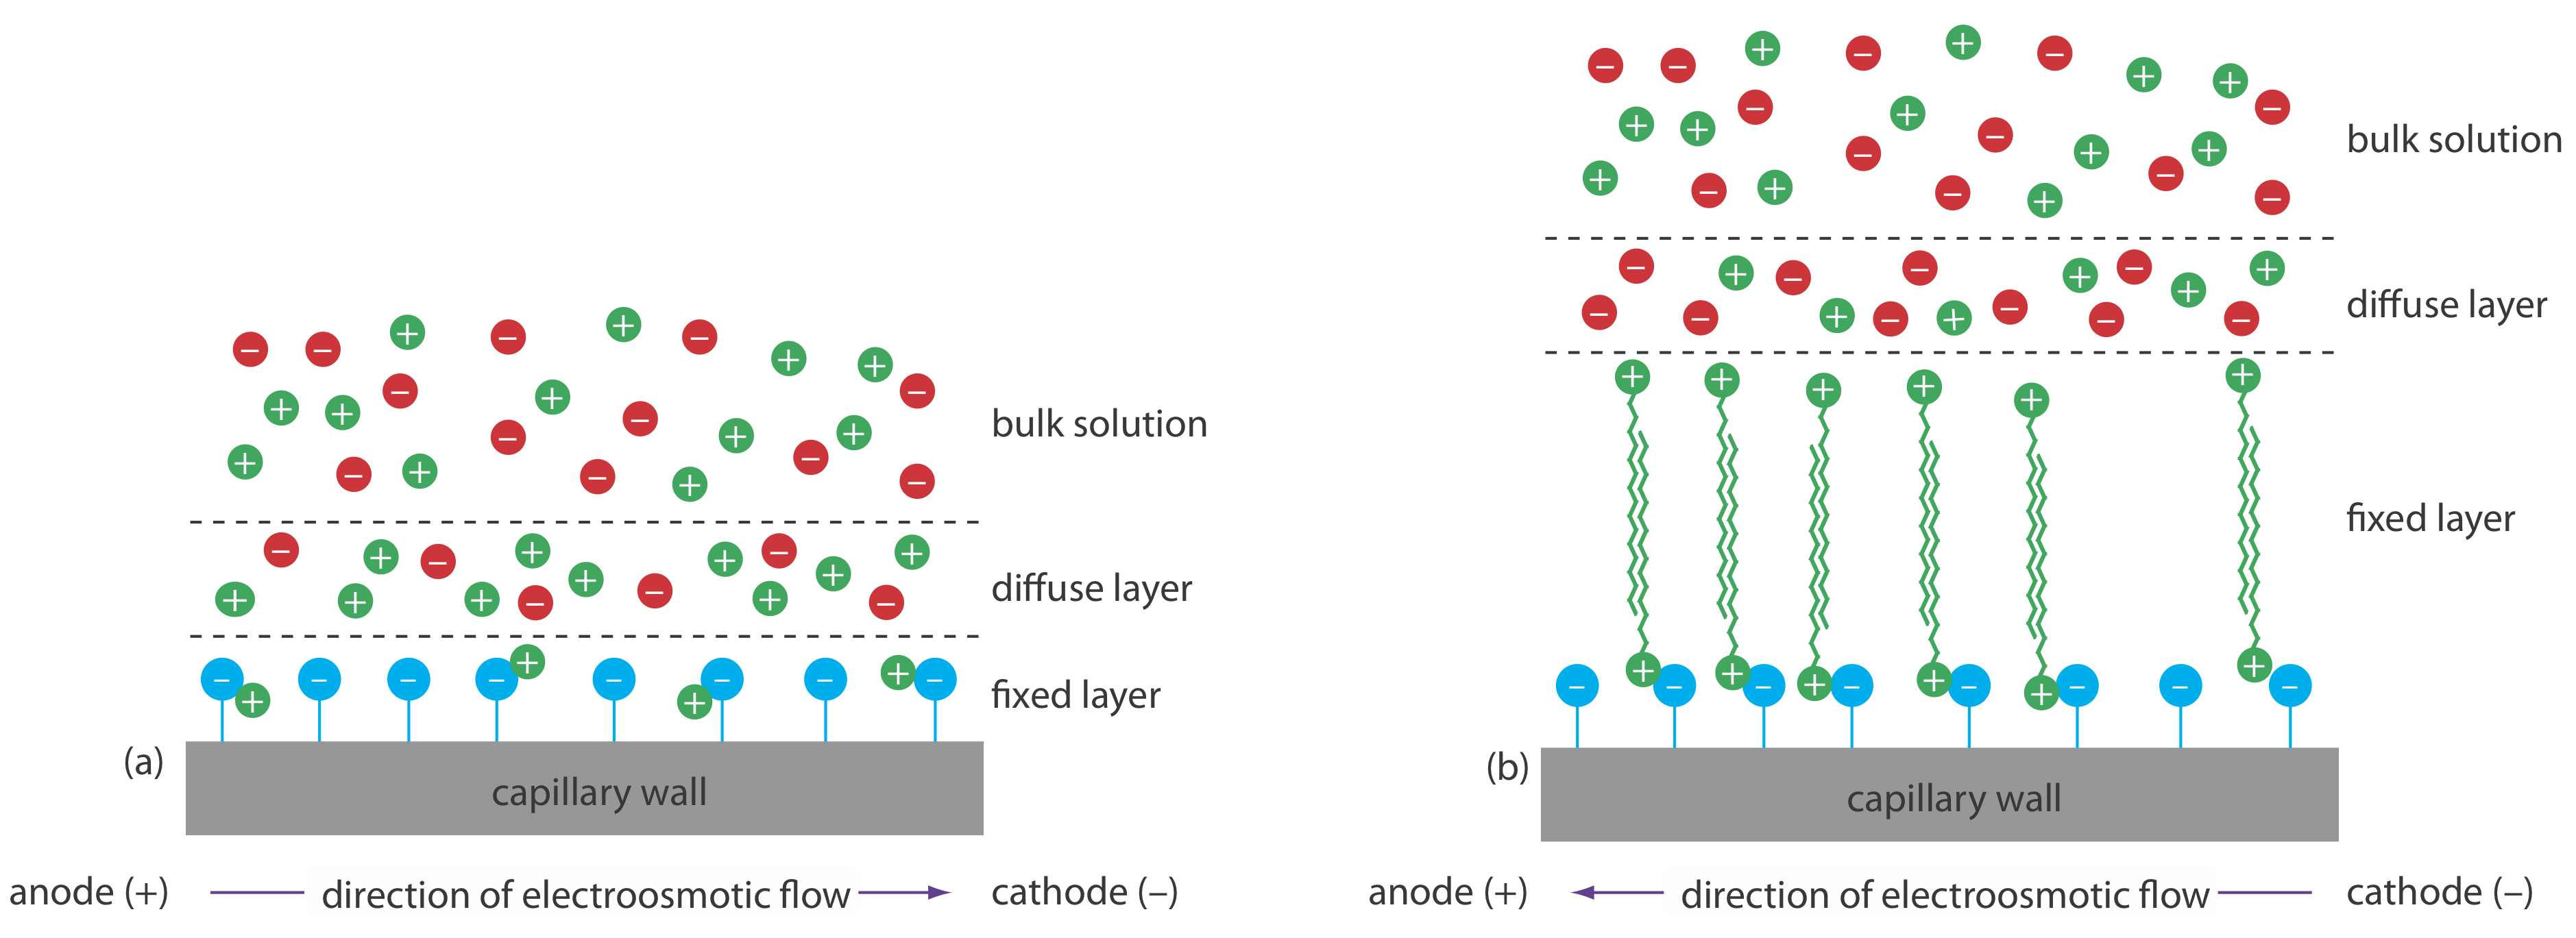 Normal migration with electroosmotic flow toward the cathode consists of a mix of +/- charged particles in the bulk solution, mostly + particles in the diffuse layer, and only + particles in the fixed layer closest to the capillary wall. When flow is reversed, the fixed layer has long chains of positive particles, and a similar diffuse and bulk layer to normal migration.